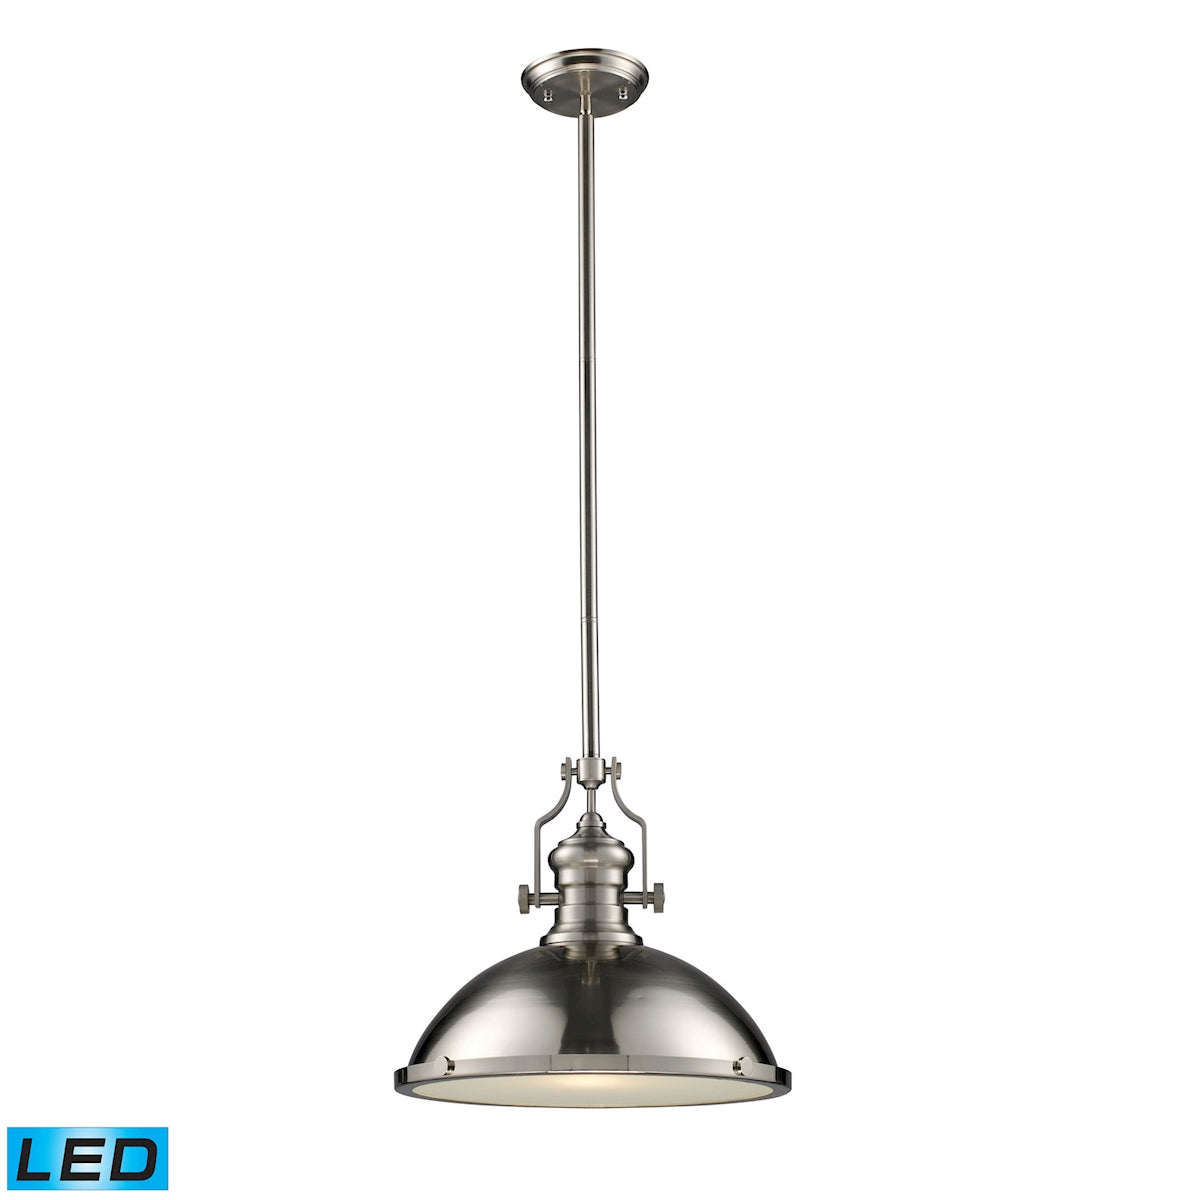 ELK Lighting 66128-1-LED Chadwick 1-Light Pendant in Satin Nickel with Matching Shade - Includes LED Bulb